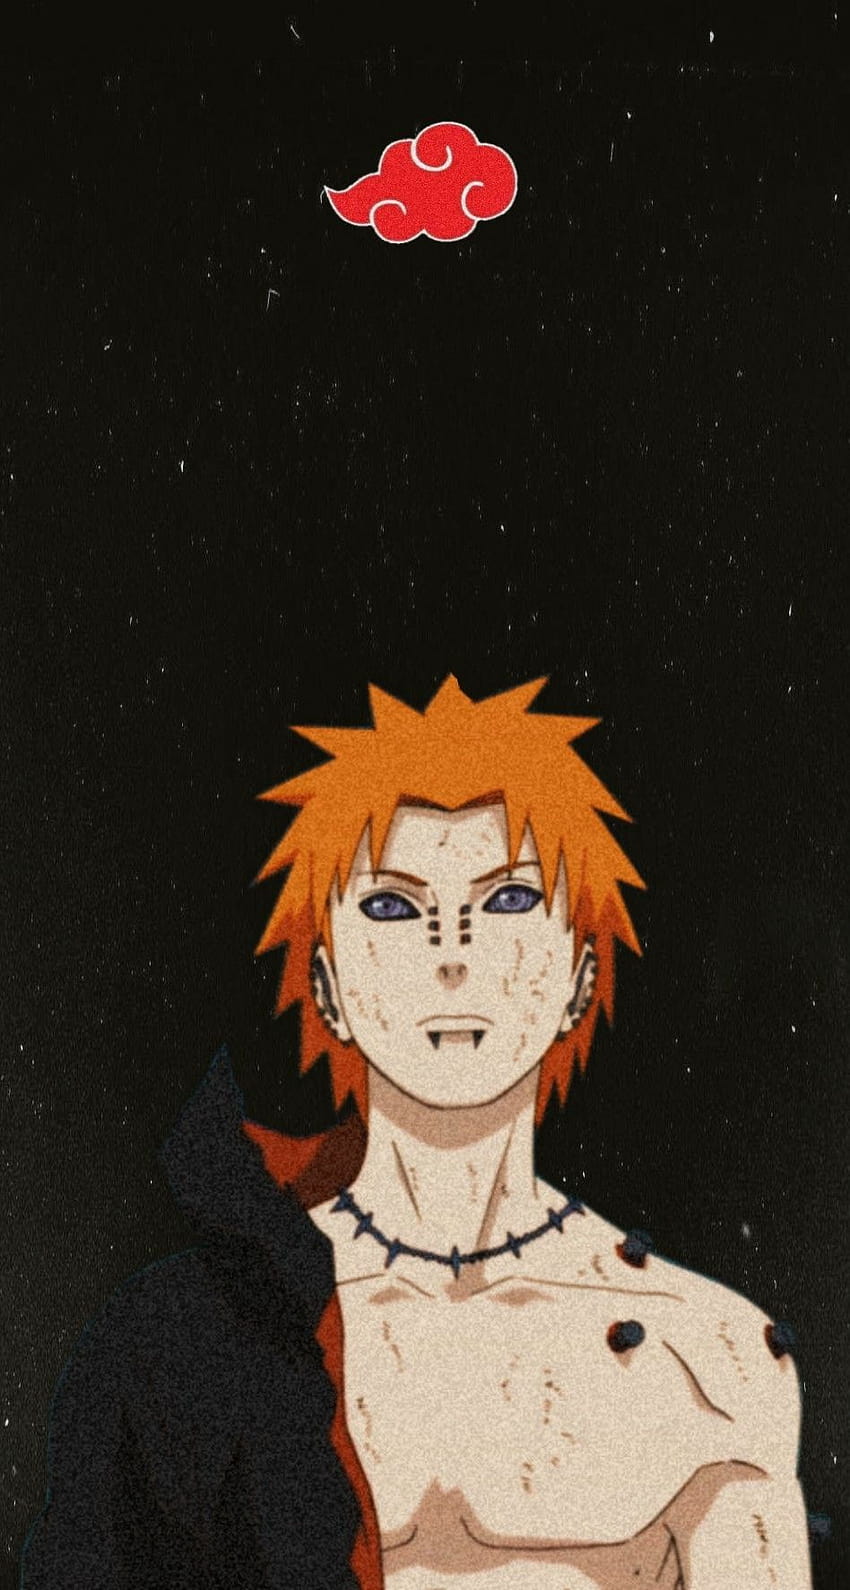 49 Pain Naruto Wallpapers for iPhone and Android by Cassidy Martinez